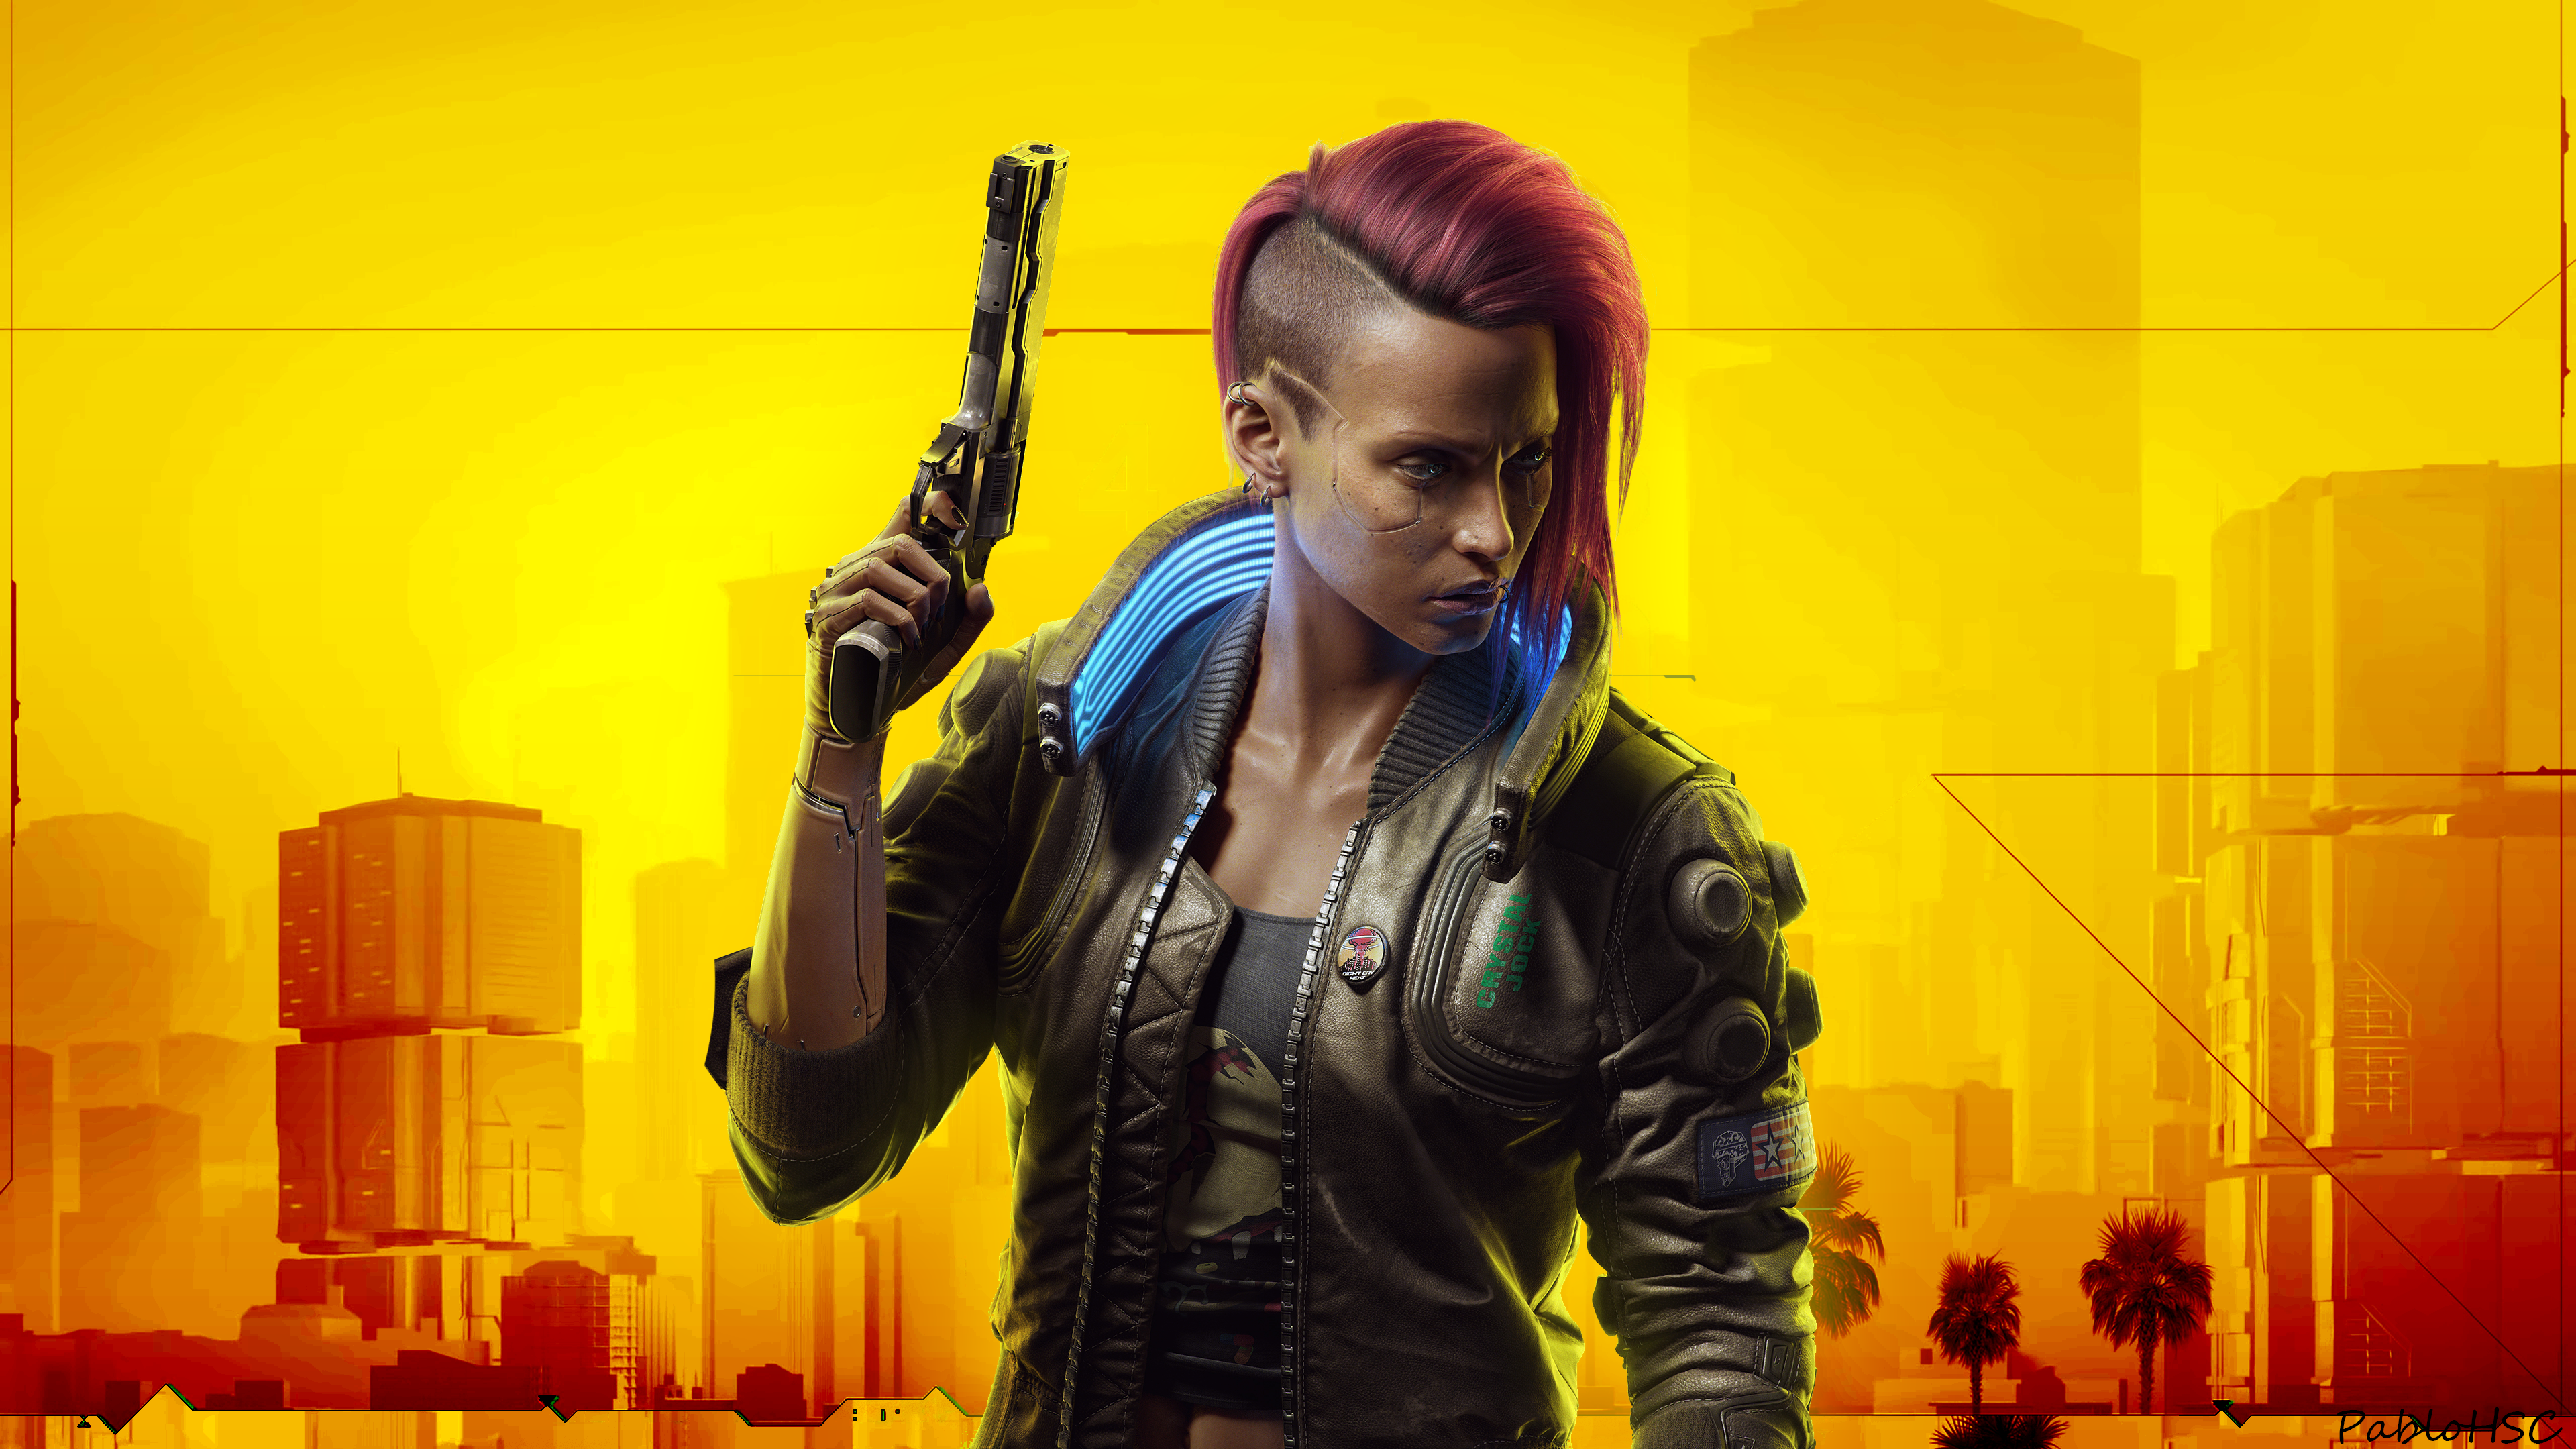 V (Cyberpunk 2077) HD Wallpapers and Backgrounds. 